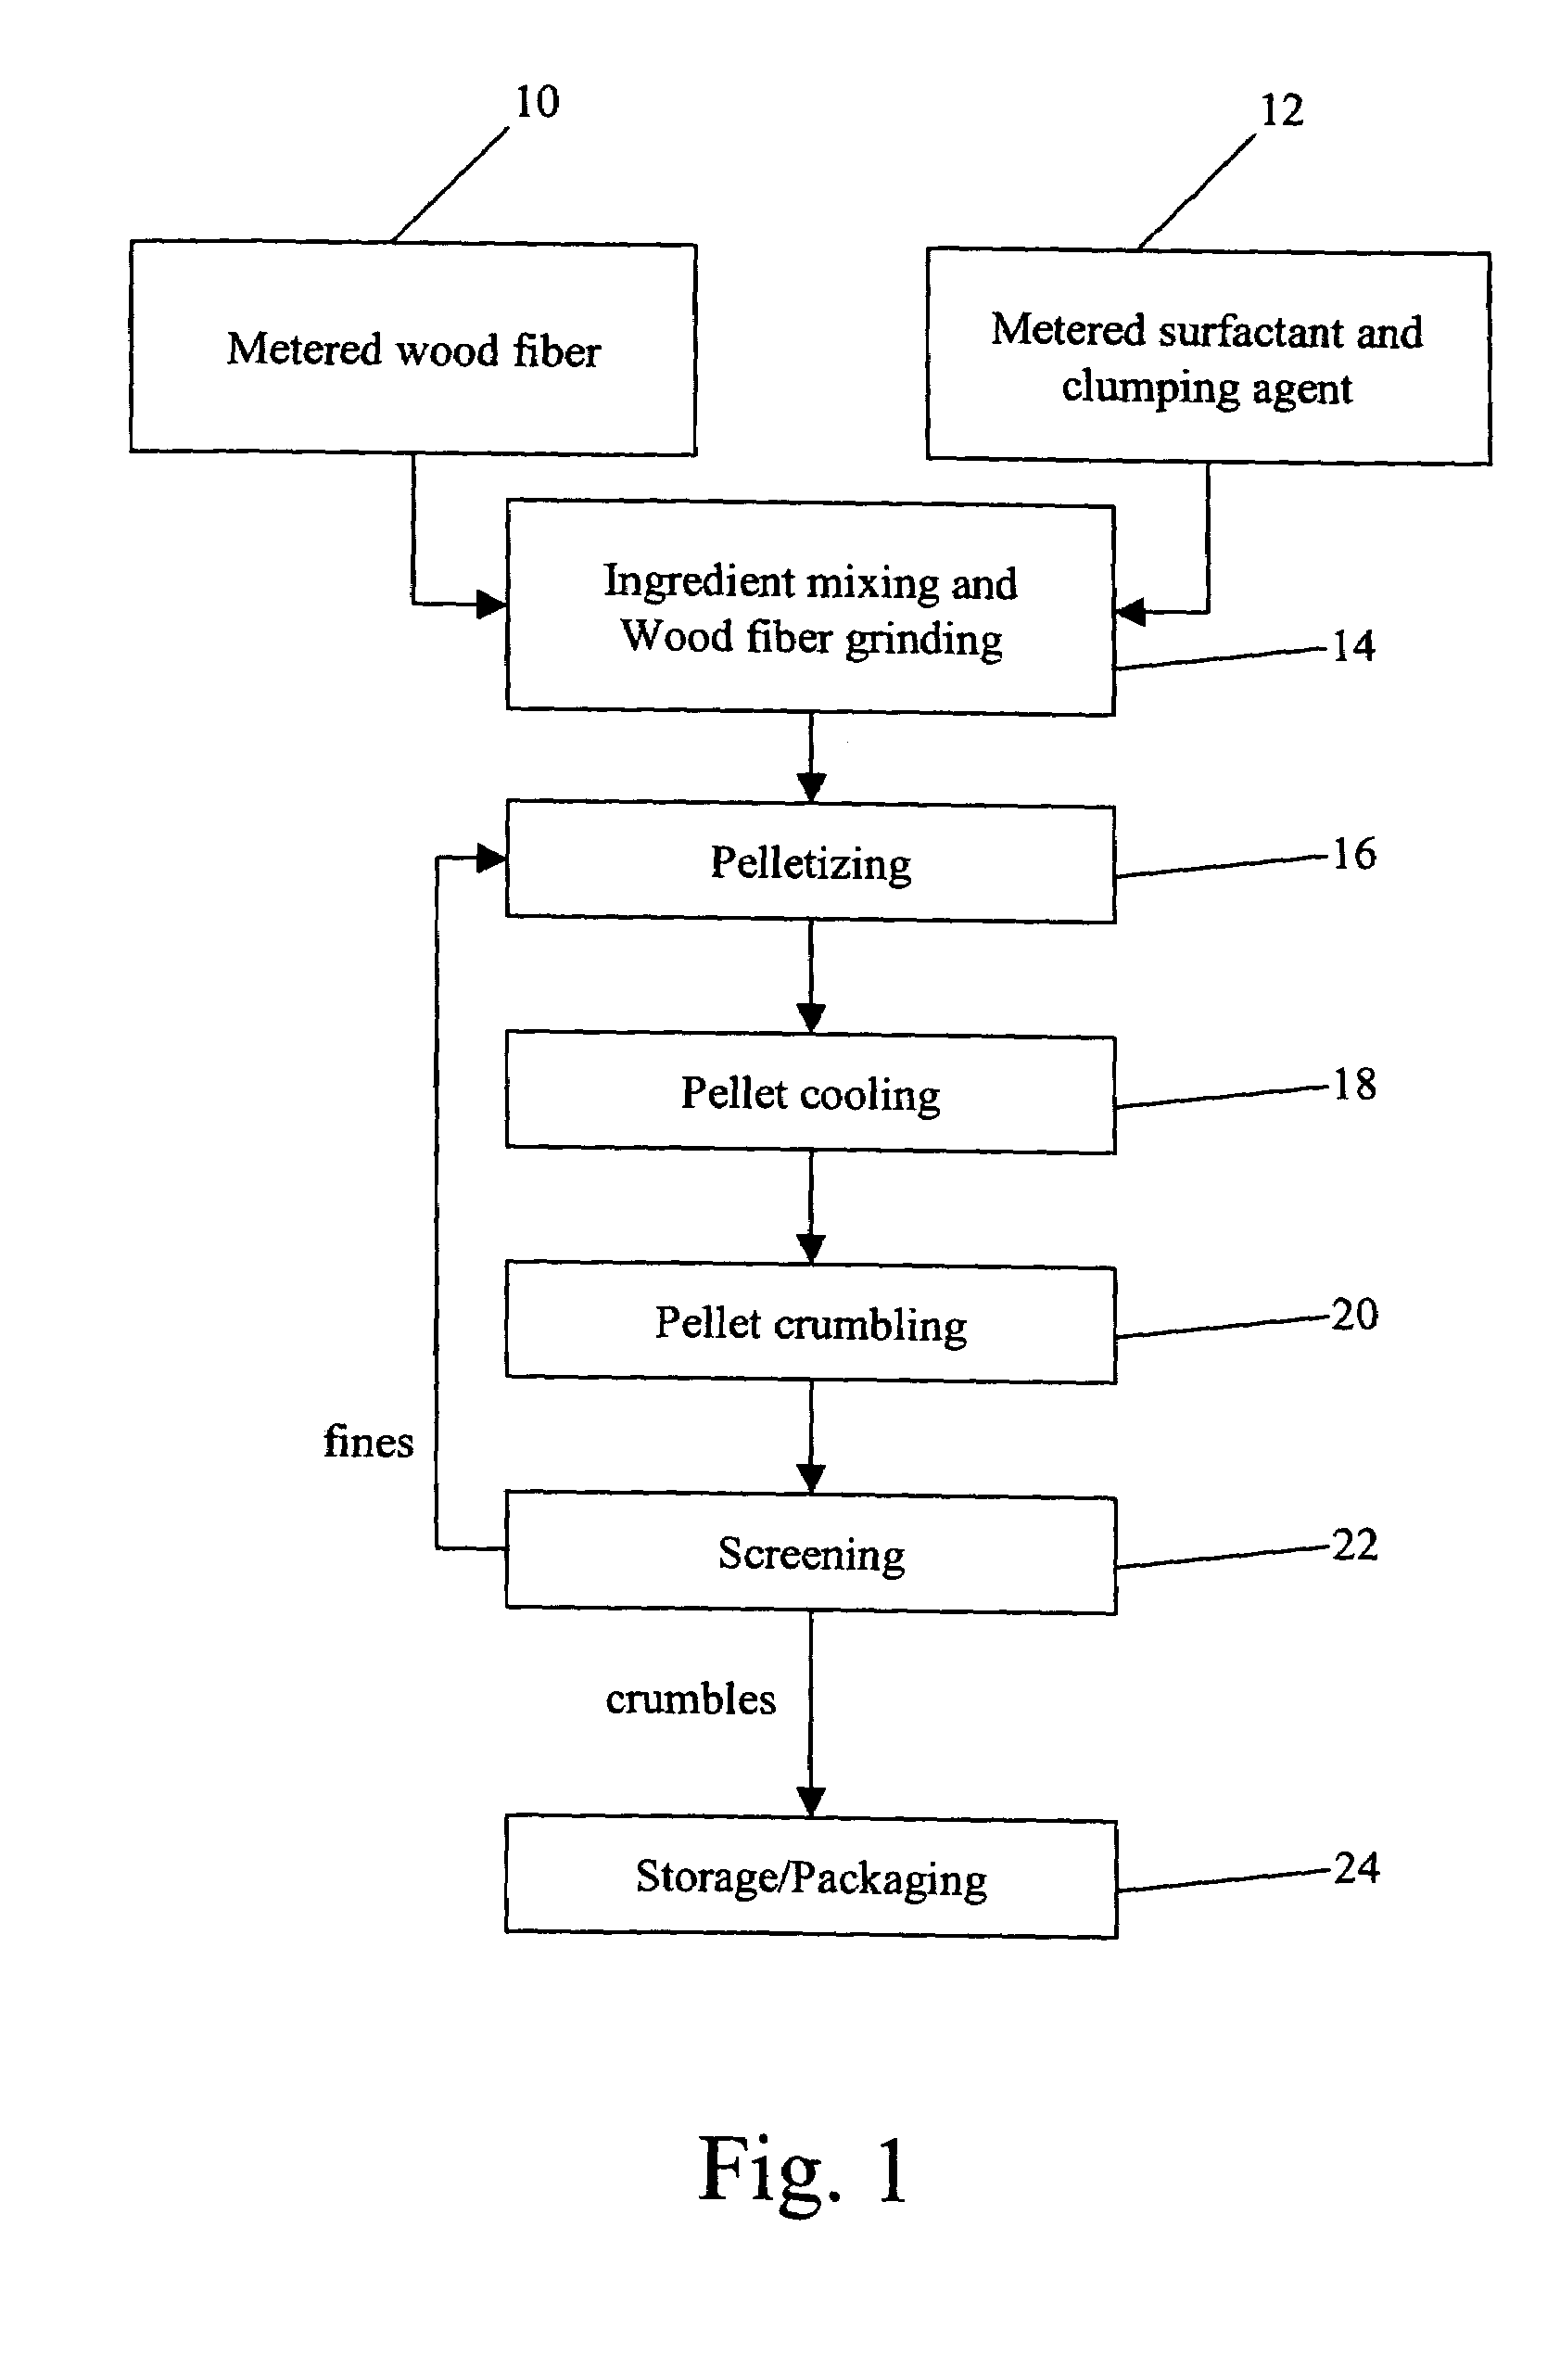 Clumping animal litter and method for making same